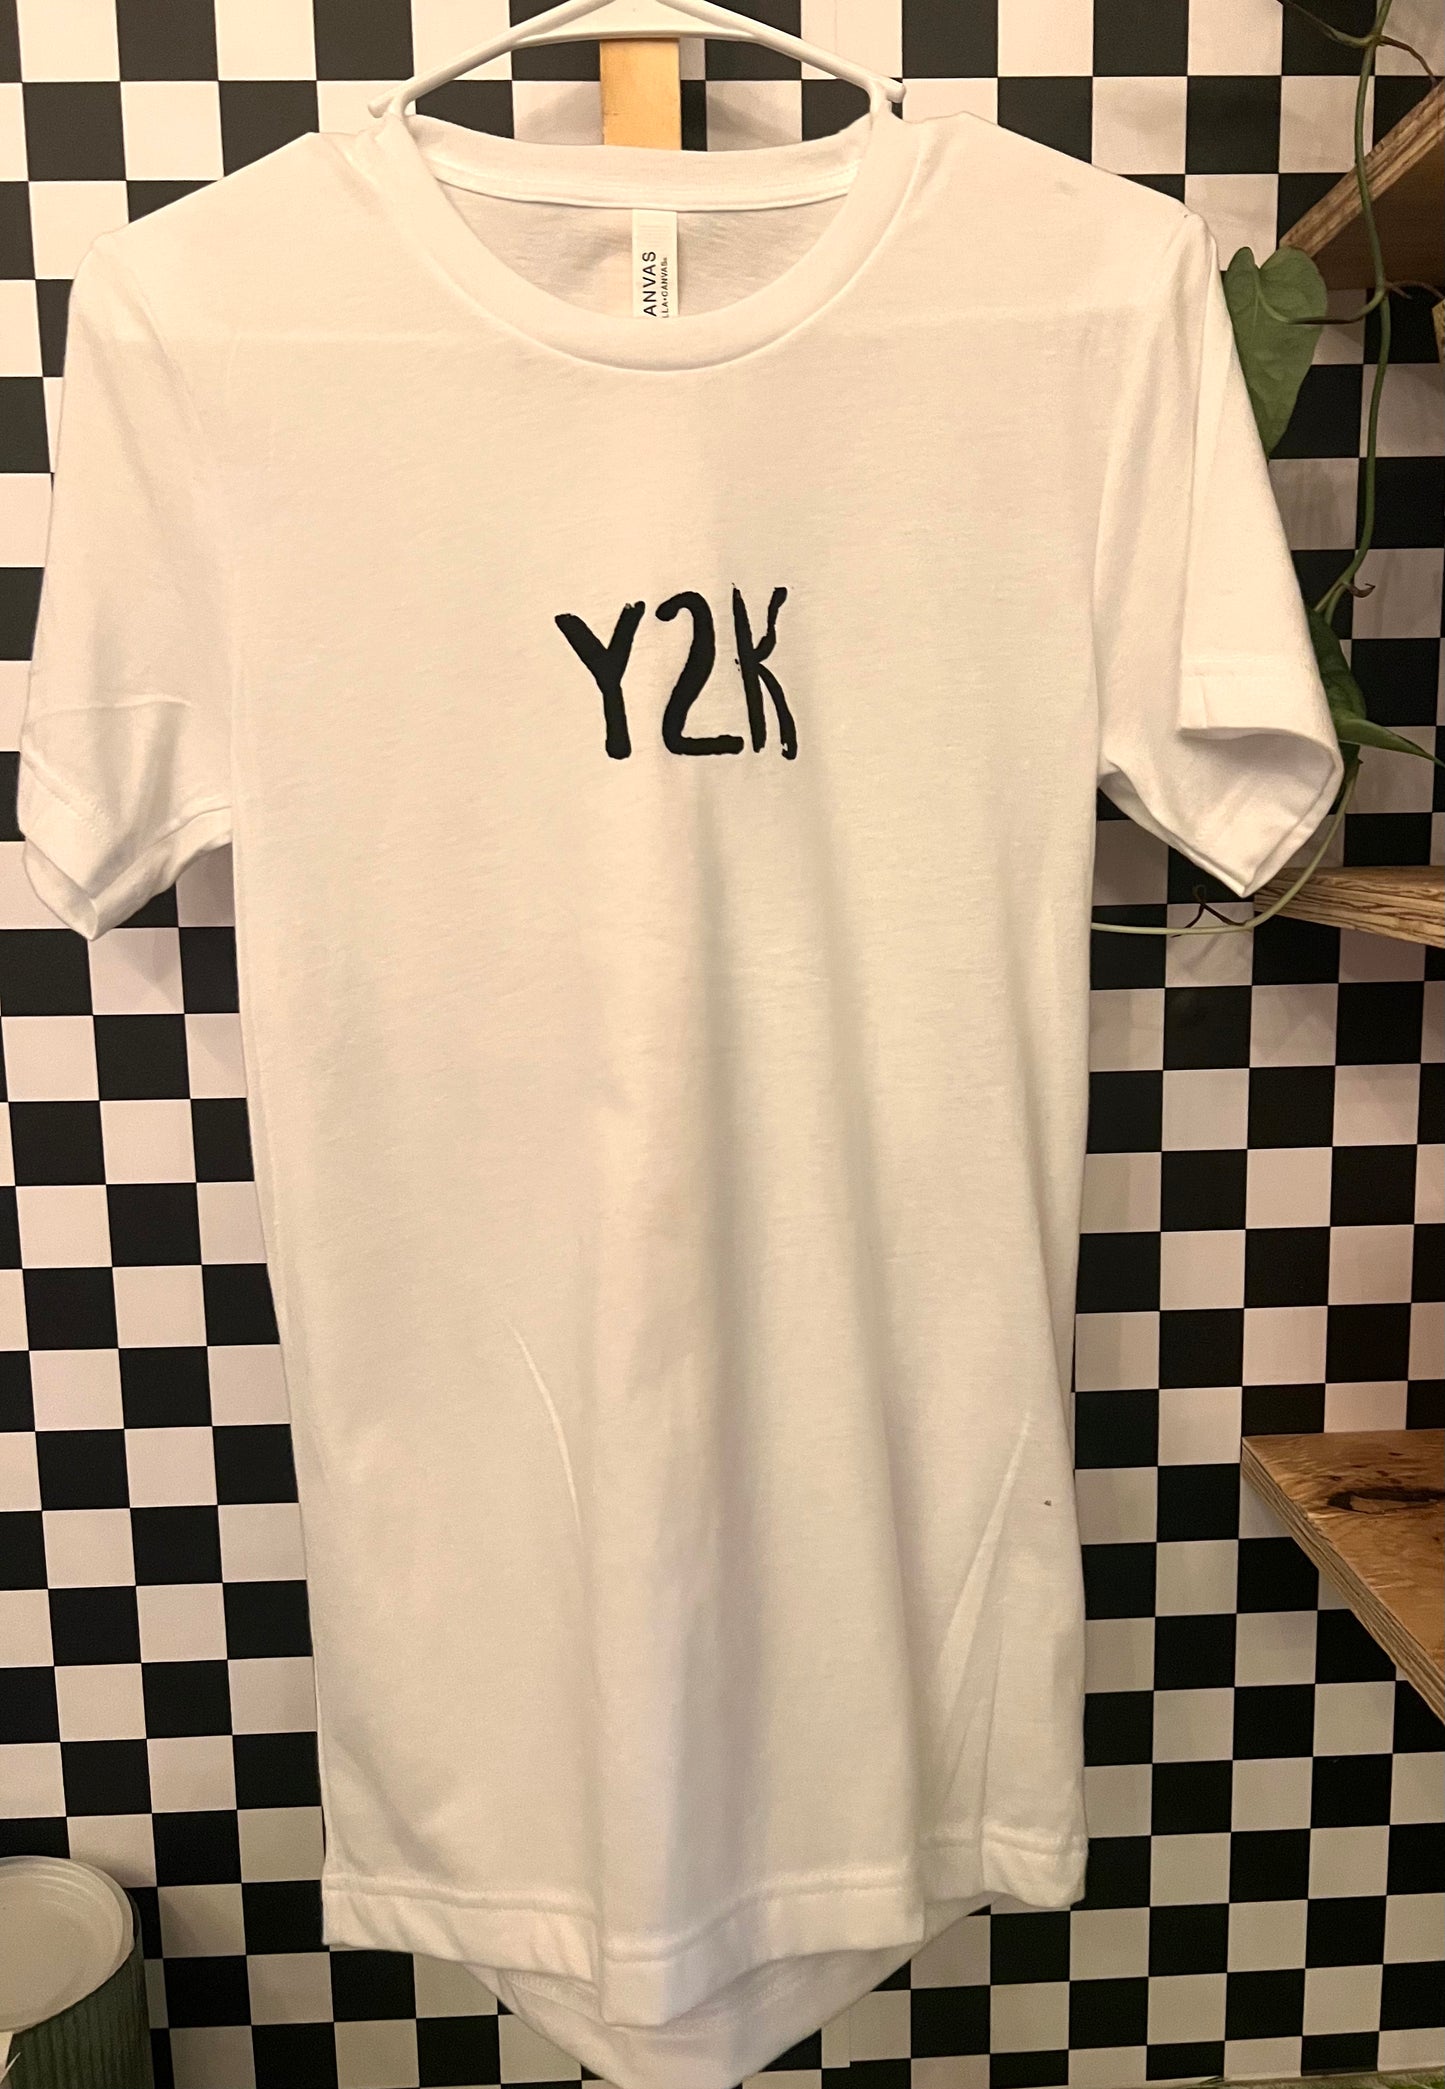 “Y2K” Hand-painted Unisex T-shirt